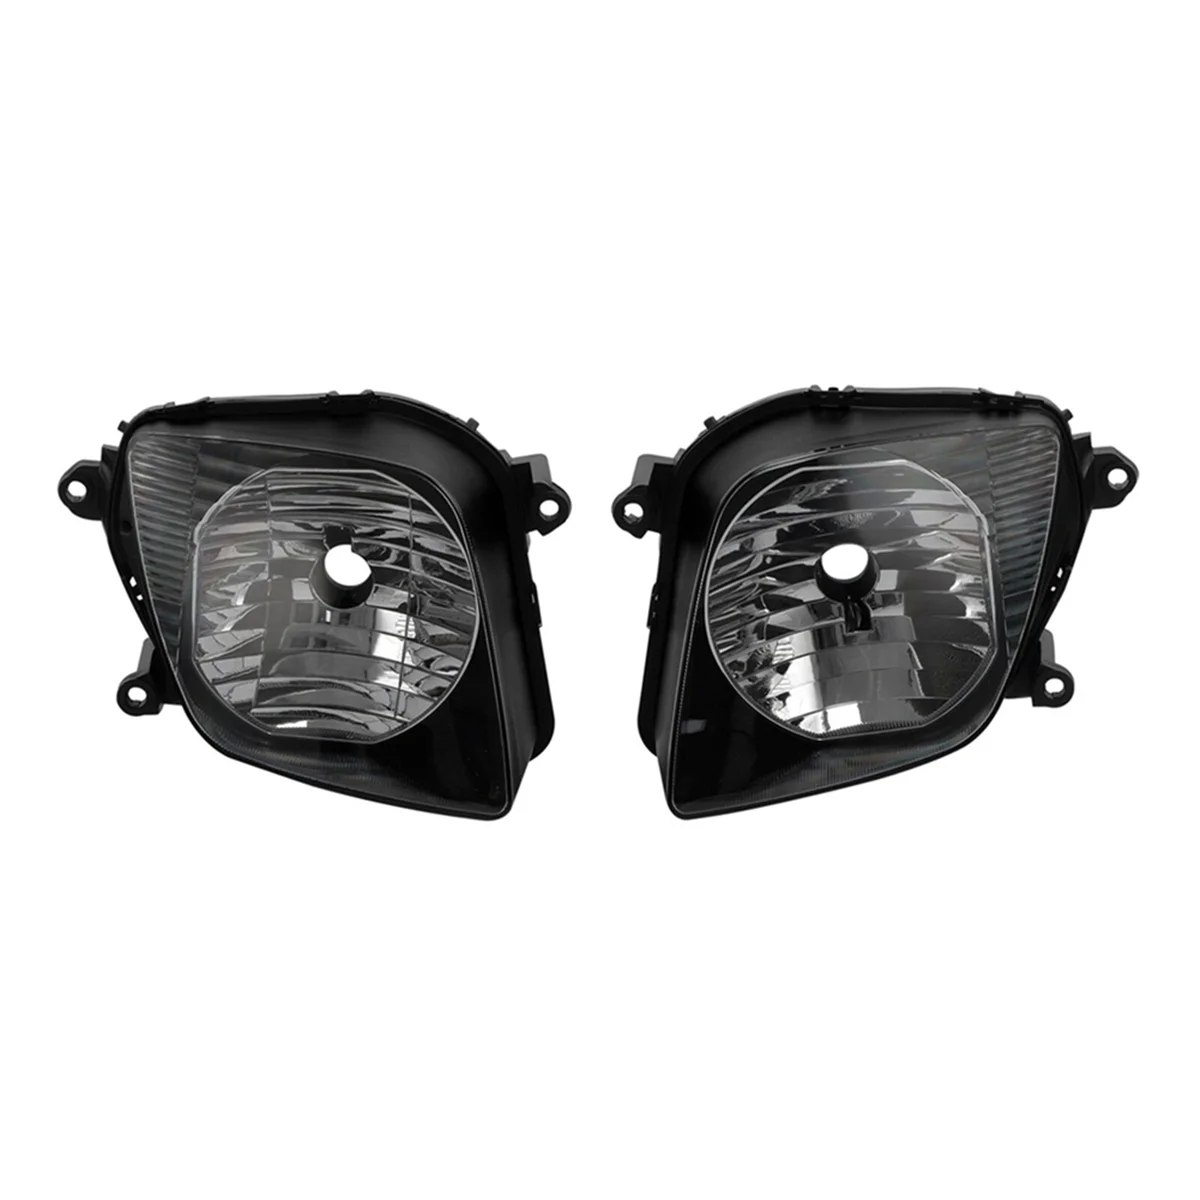 

Car Front Headlight Head Light Lamp Assembly Fit for Honda RVT1000 RVT1000R RC51 2000-2006